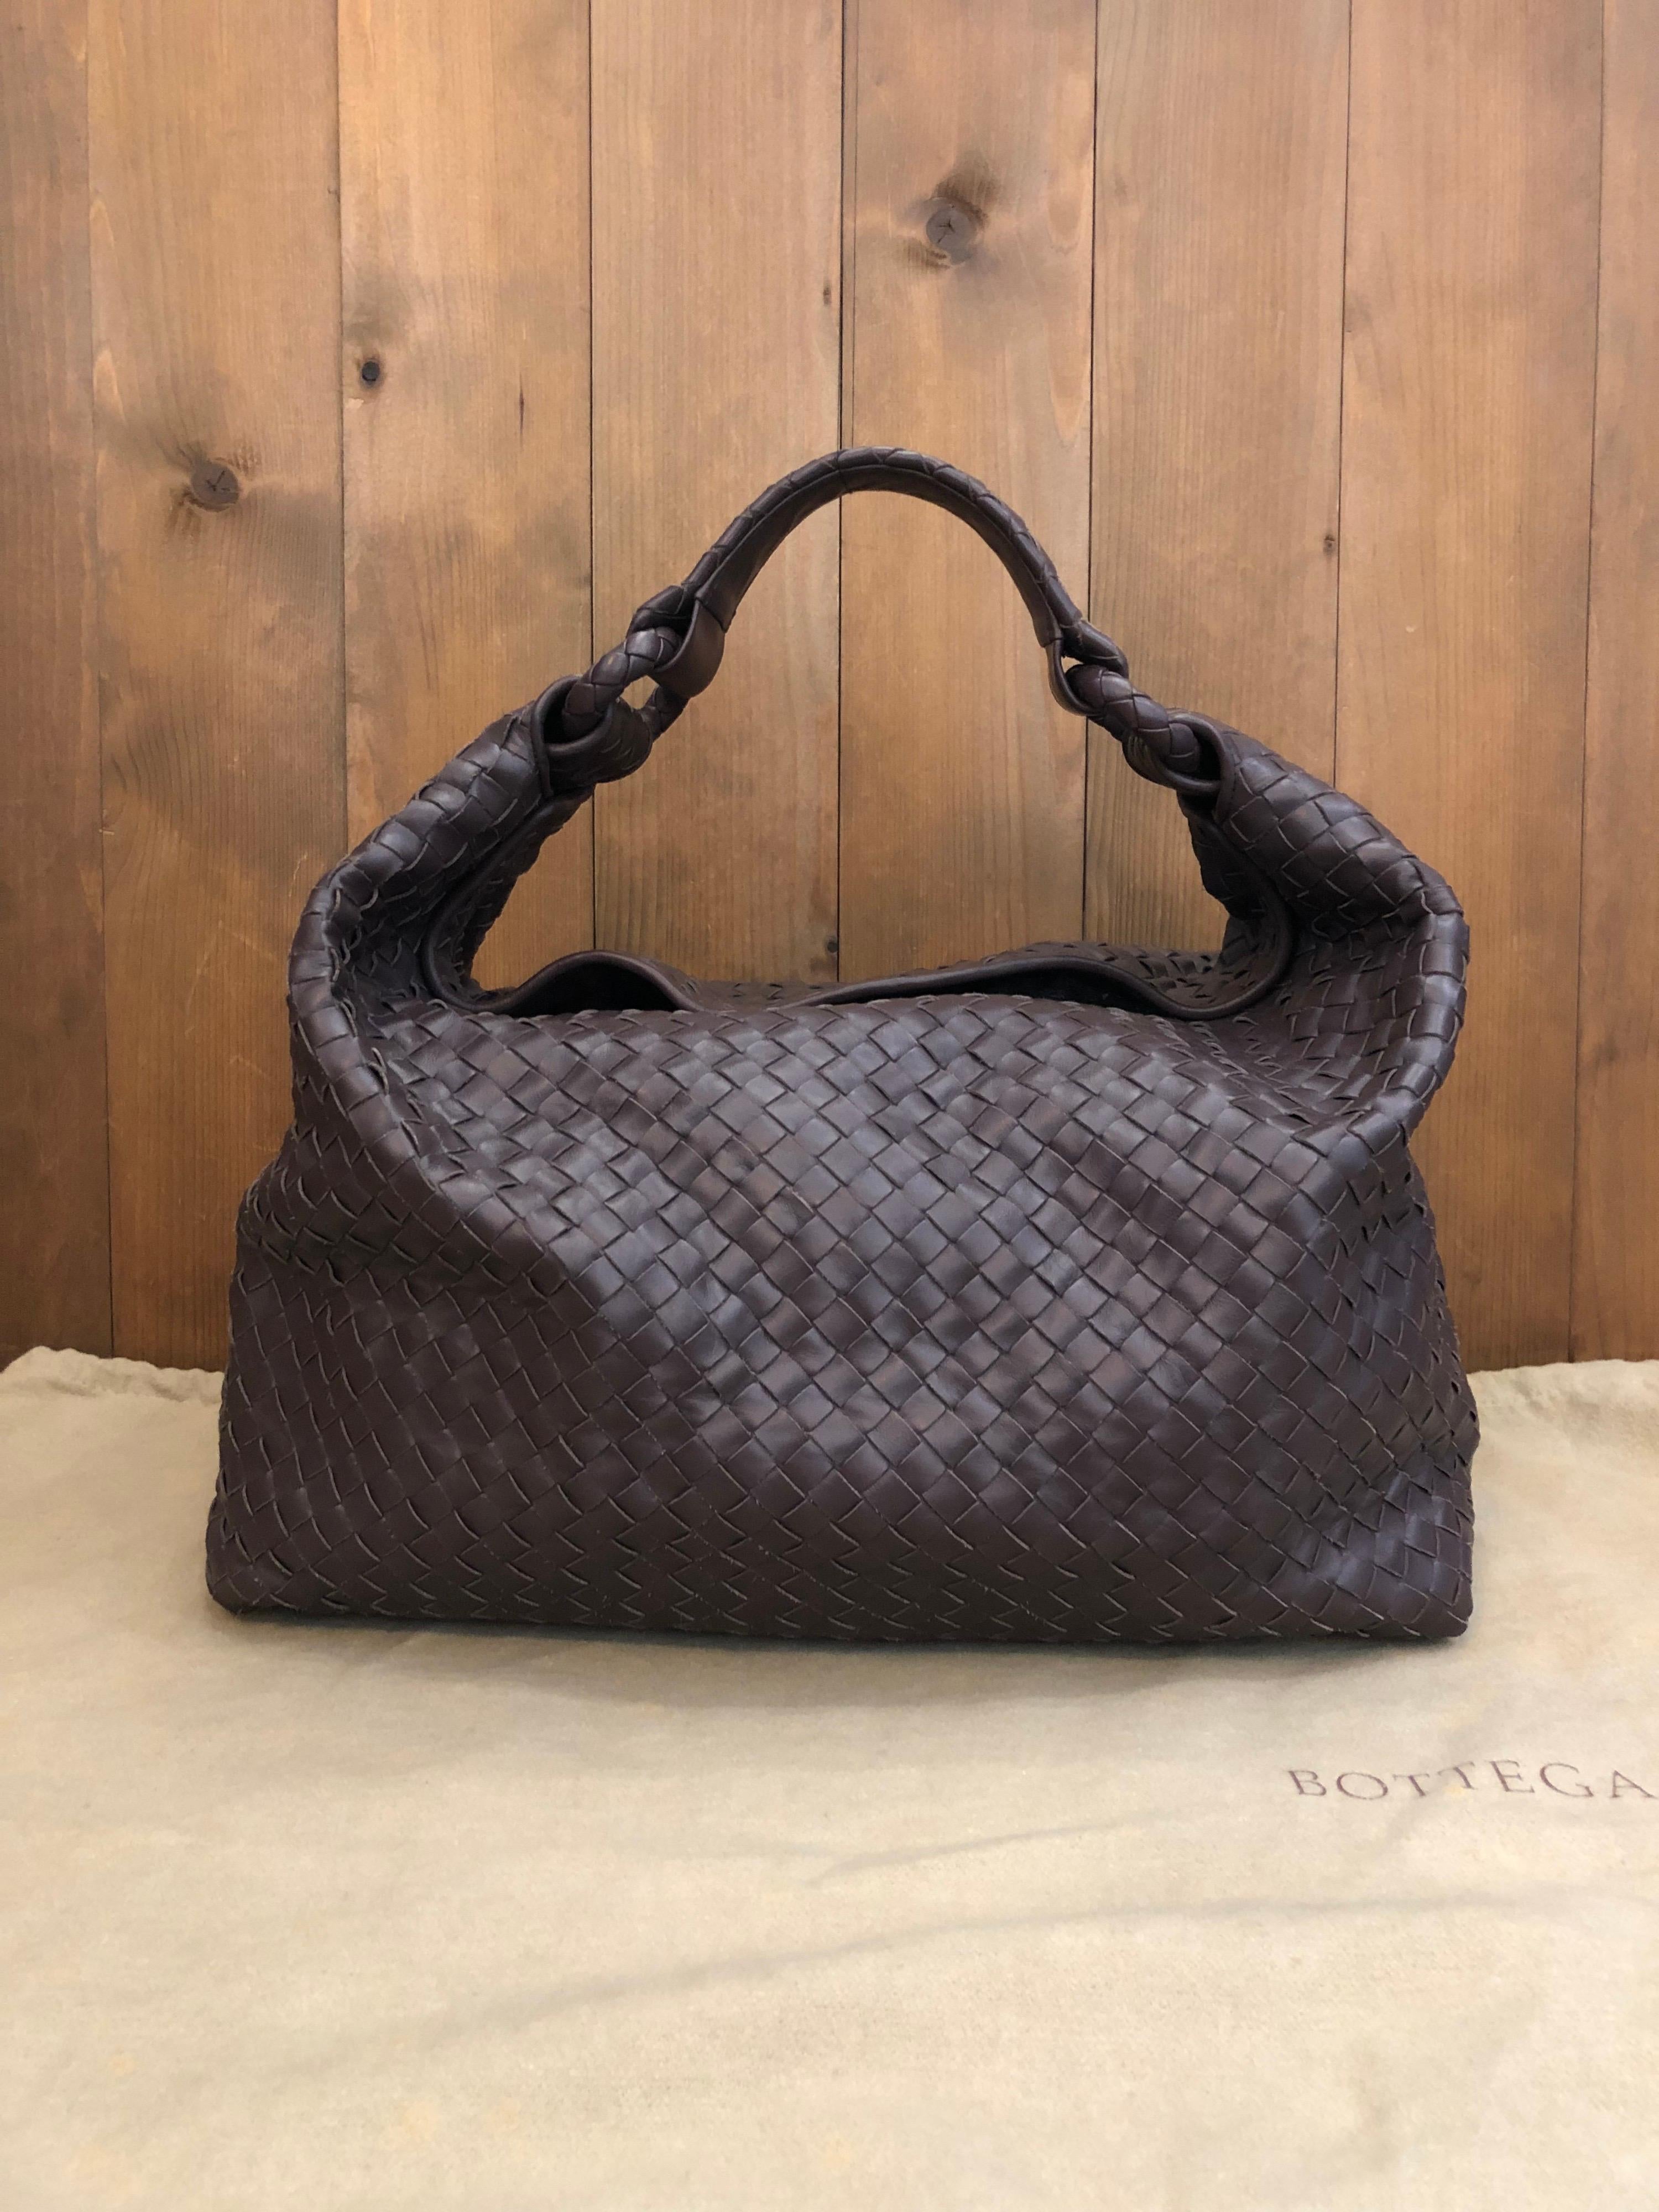 2010s Bottega Veneta hobo bag in brown intrecciato nappa leather featuring a single handle. The interior of the bag is lined with elegant suede and a zip pocket, designed for everyday essential use. Magnetic closure. Made in Italy. Measures